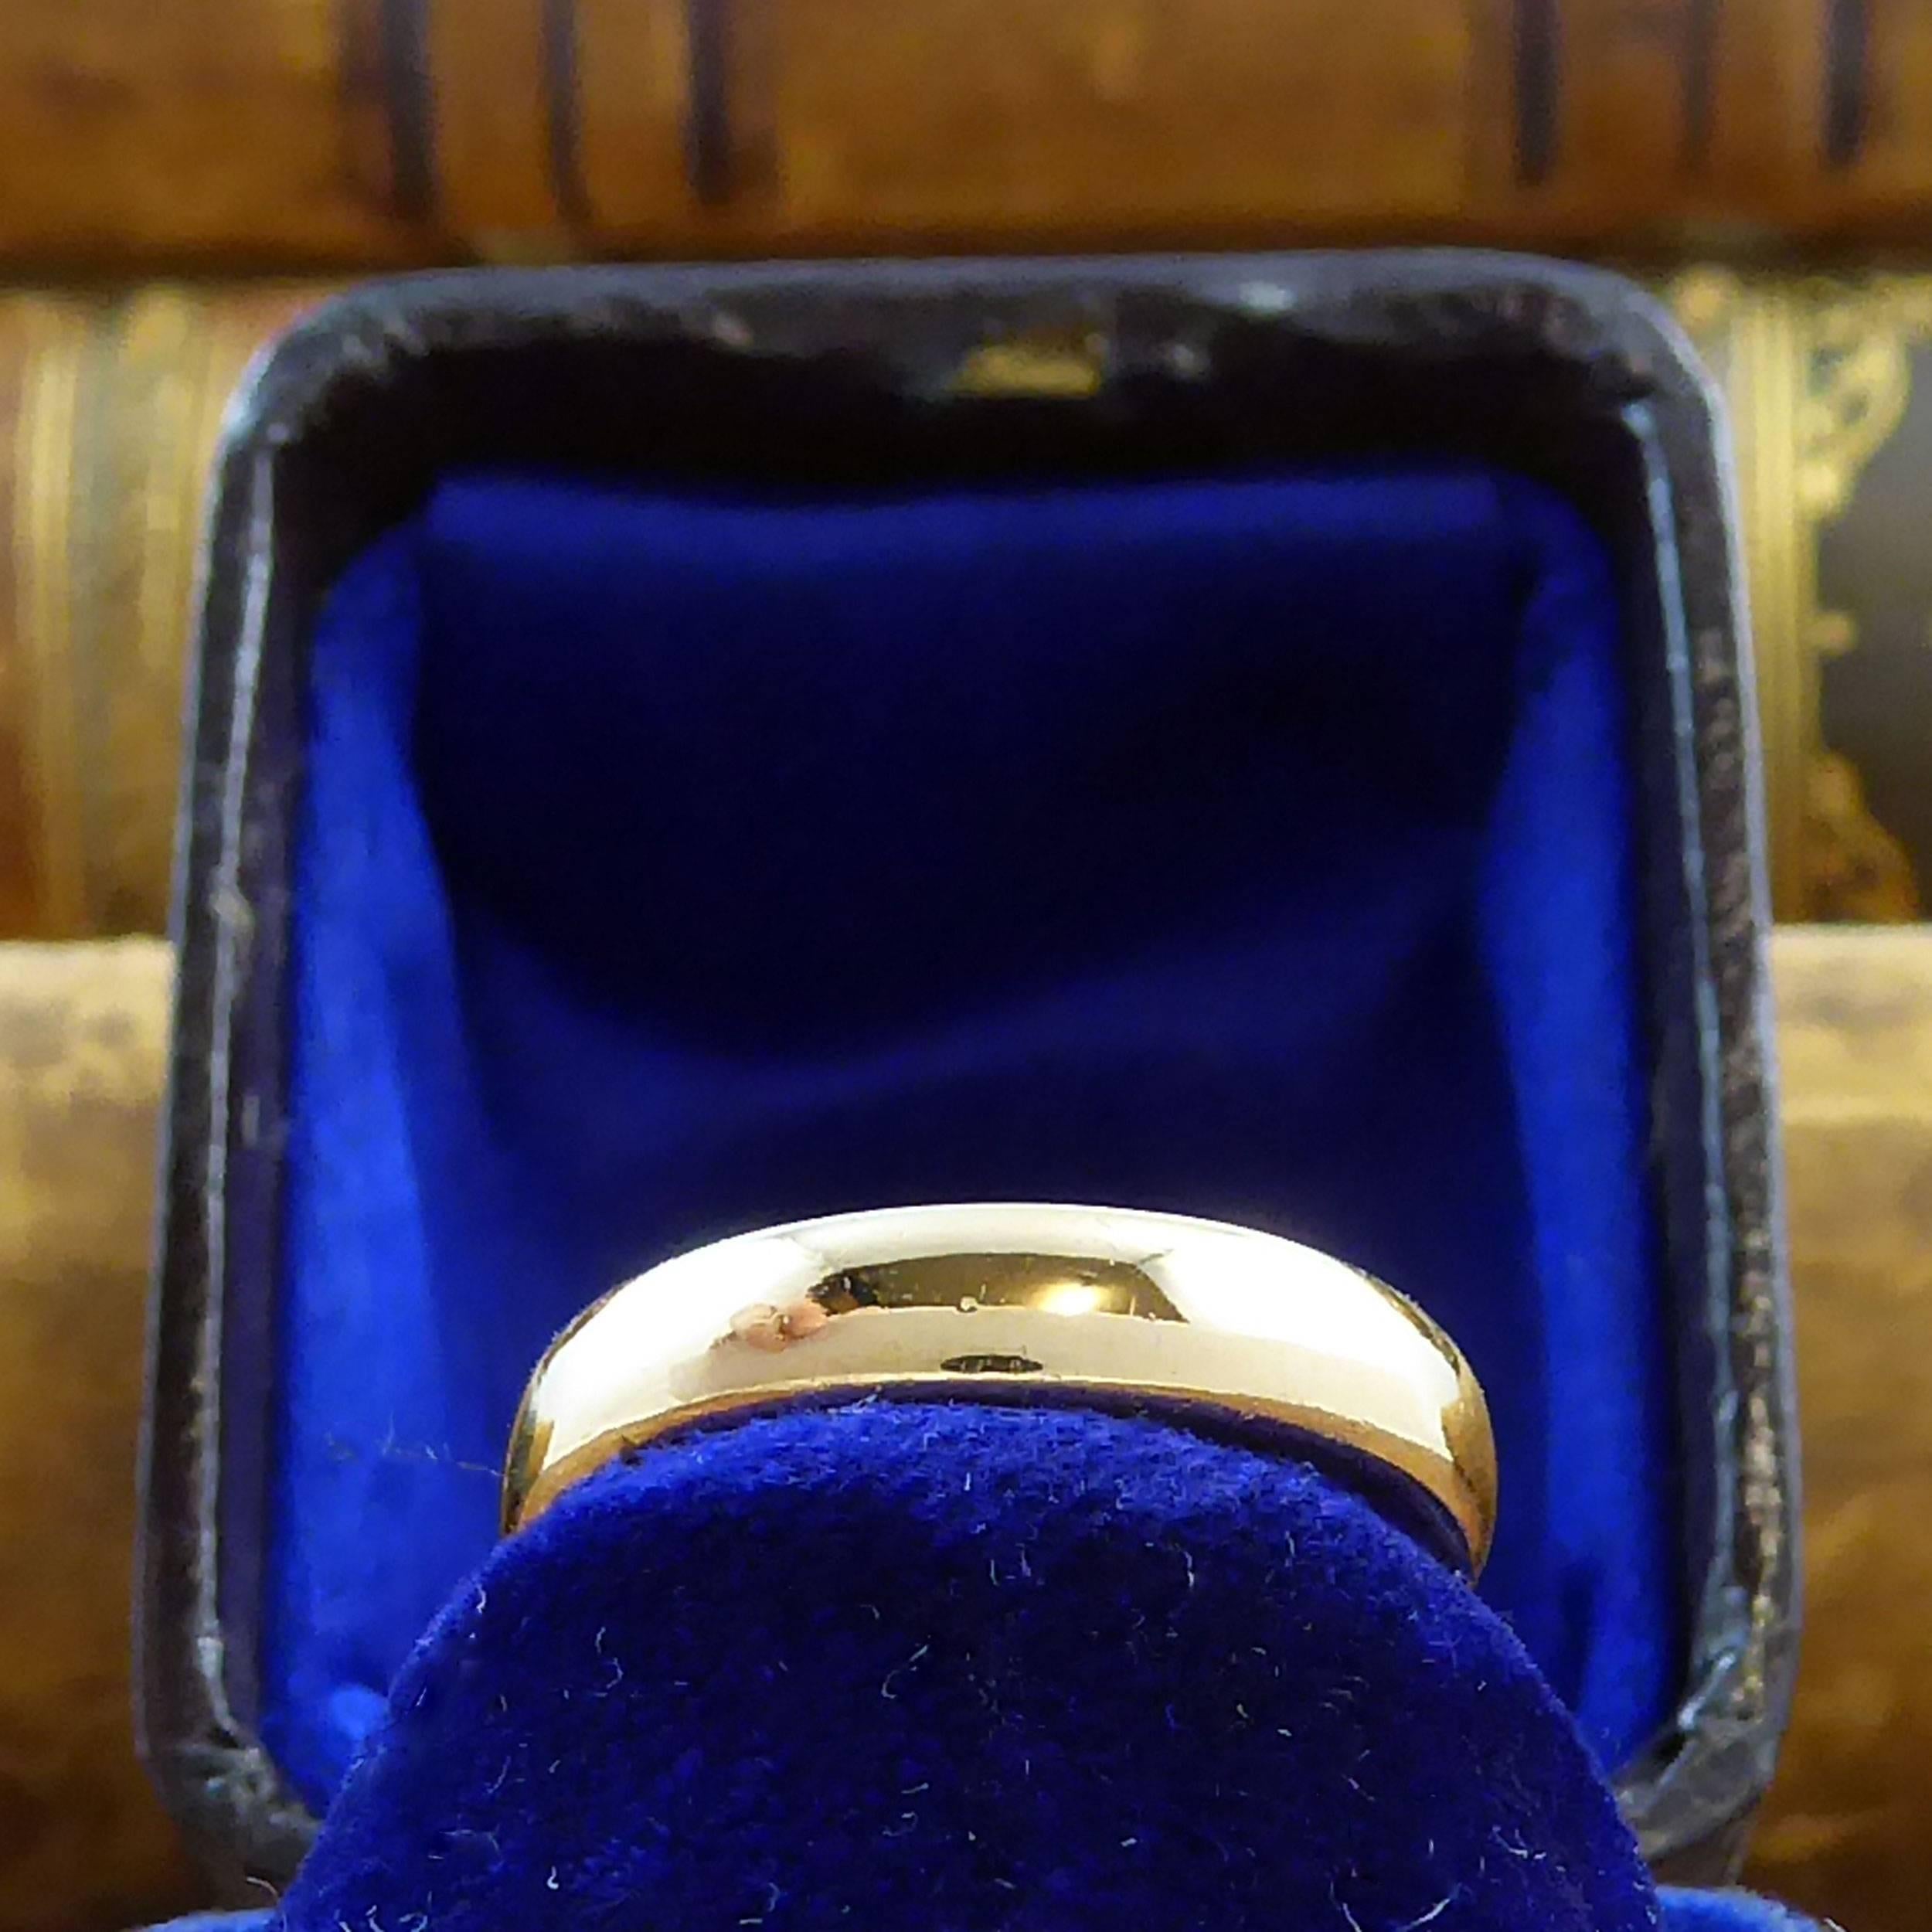 An Art Deco wedding band in 22 Carat yellow gold.  Hallmarked in 1929 at the Birmingham Assay Office in the UK, this beautiful little ring is so wearable both as it's intended purpose as a wedding ring or a simple and elegant everyday gold band.  A